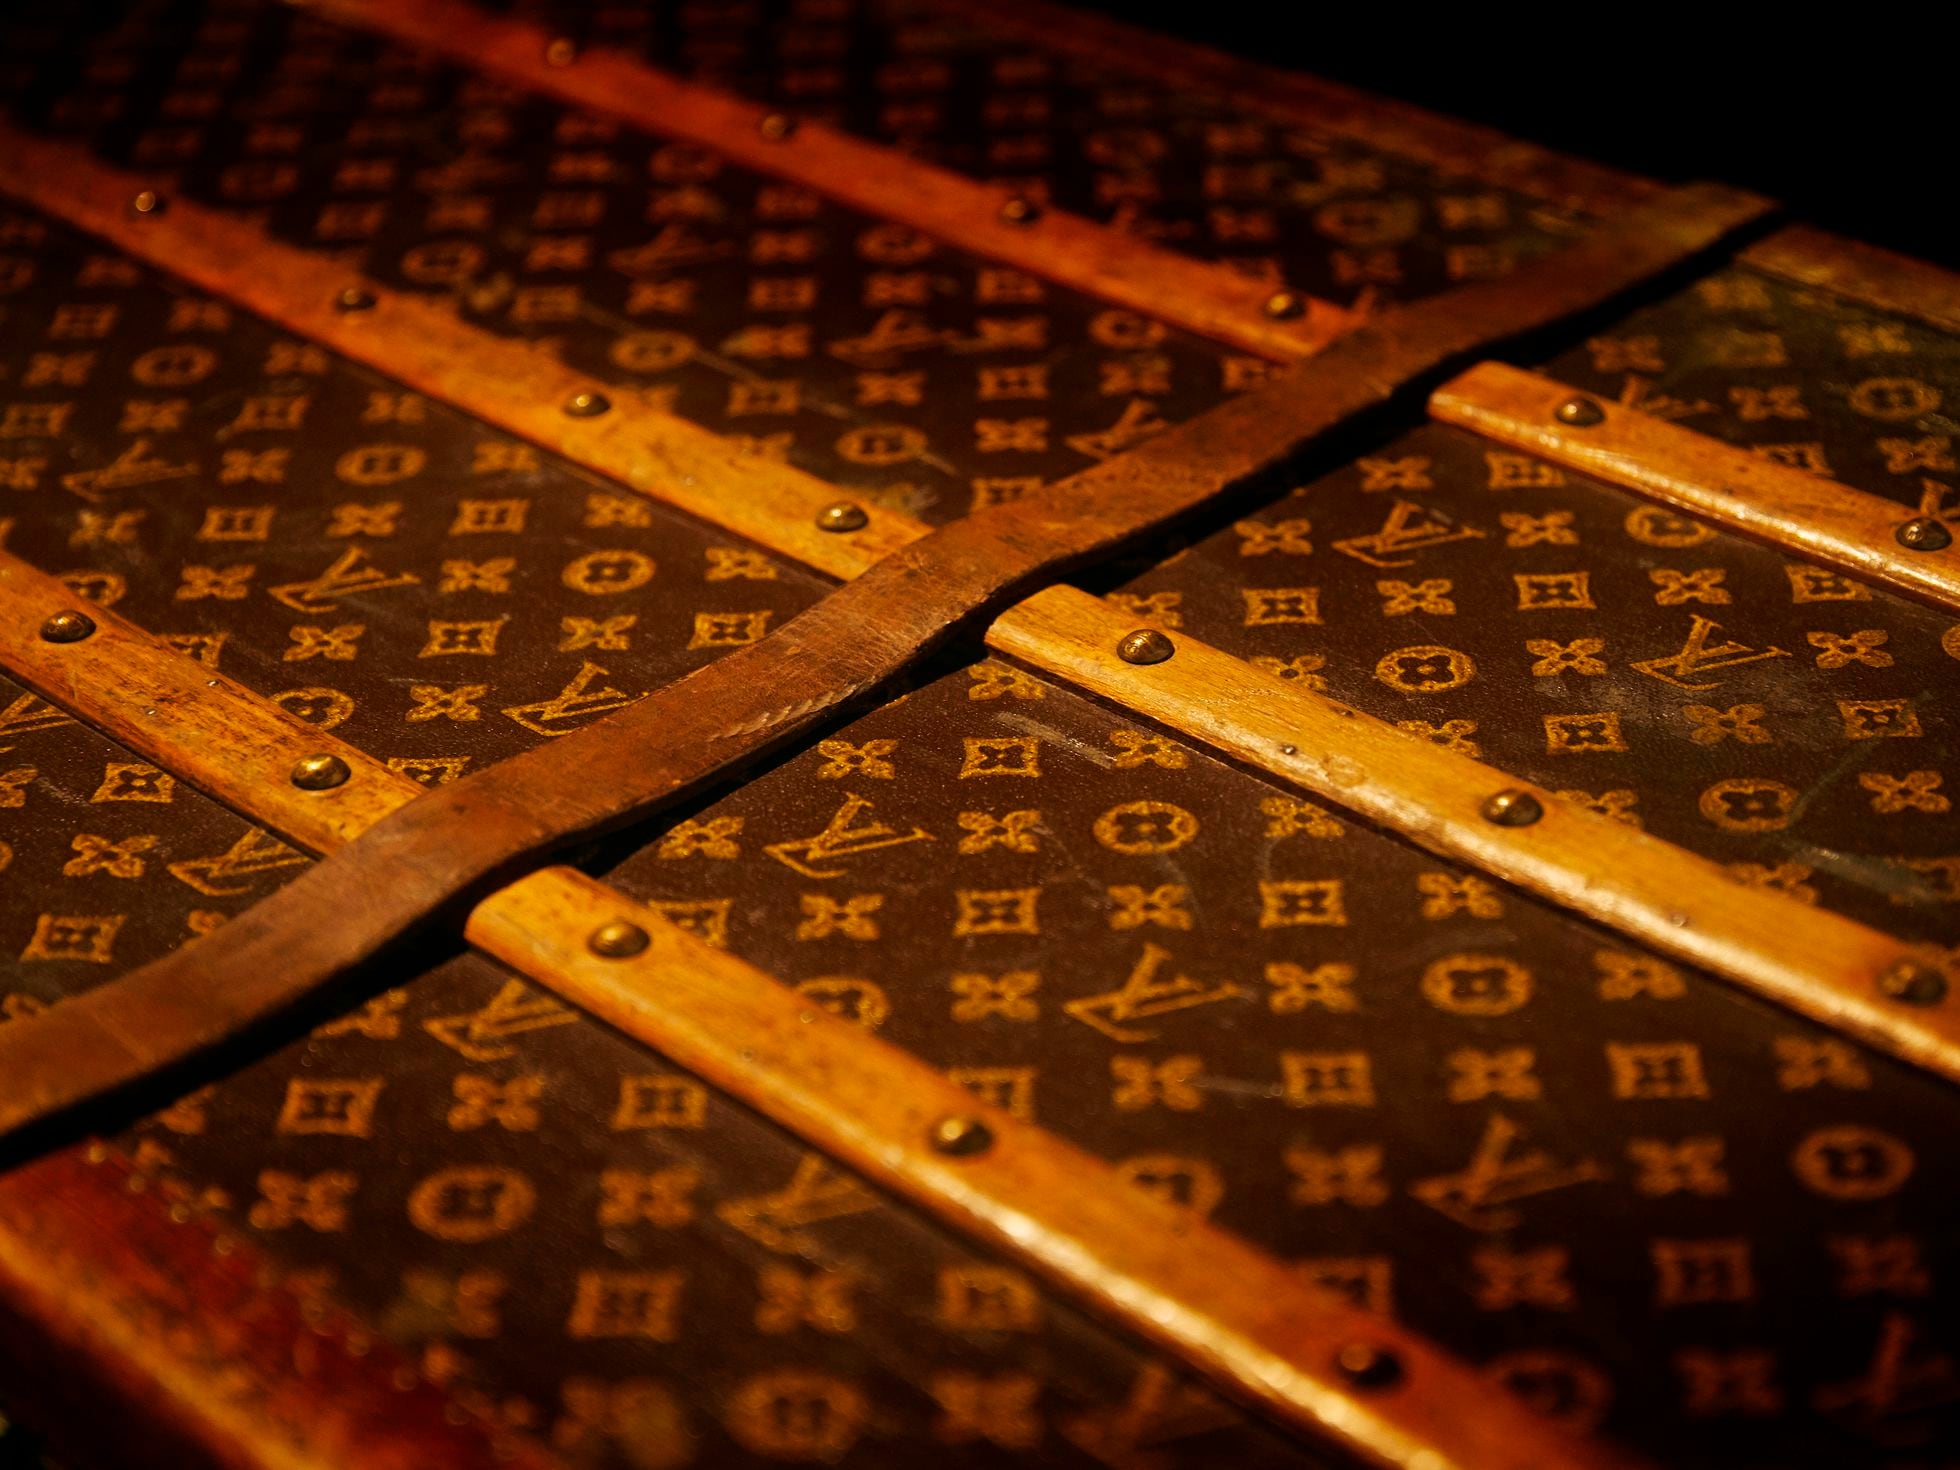 Story of Louis Vuitton: As travel changed, so did luggage